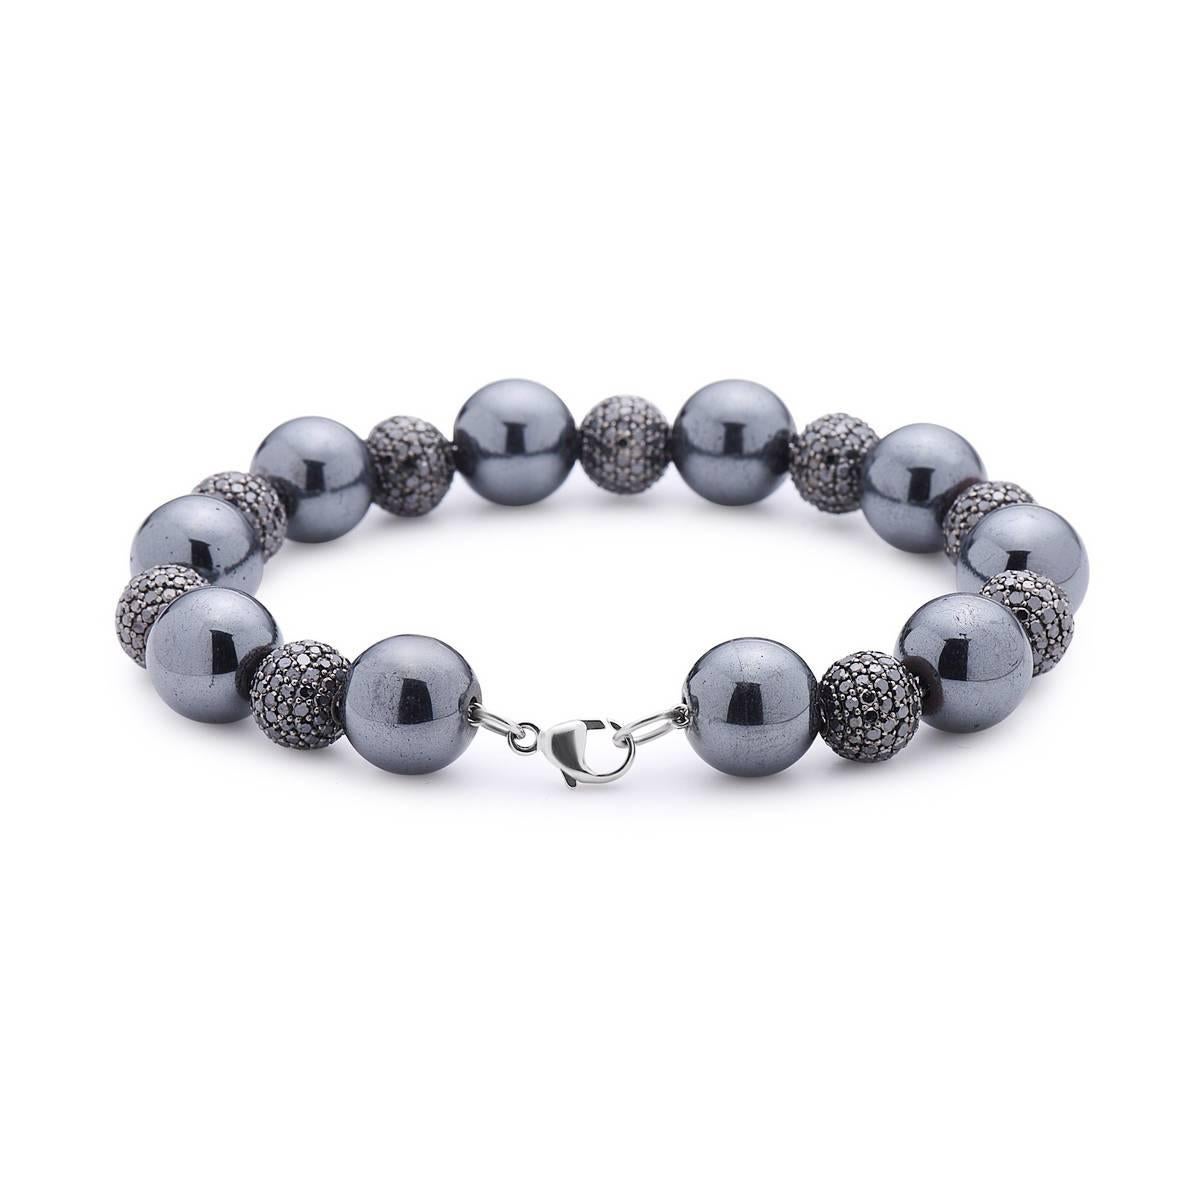 Chic Tennis Black Diamond Ball Bracelet is an excellent piece to match any of your black outfit. It is 7 inch long but the size can be adjusted if requested. The balls are 8mm diamonds with alternate 10mm hematite passing through 14K white gold